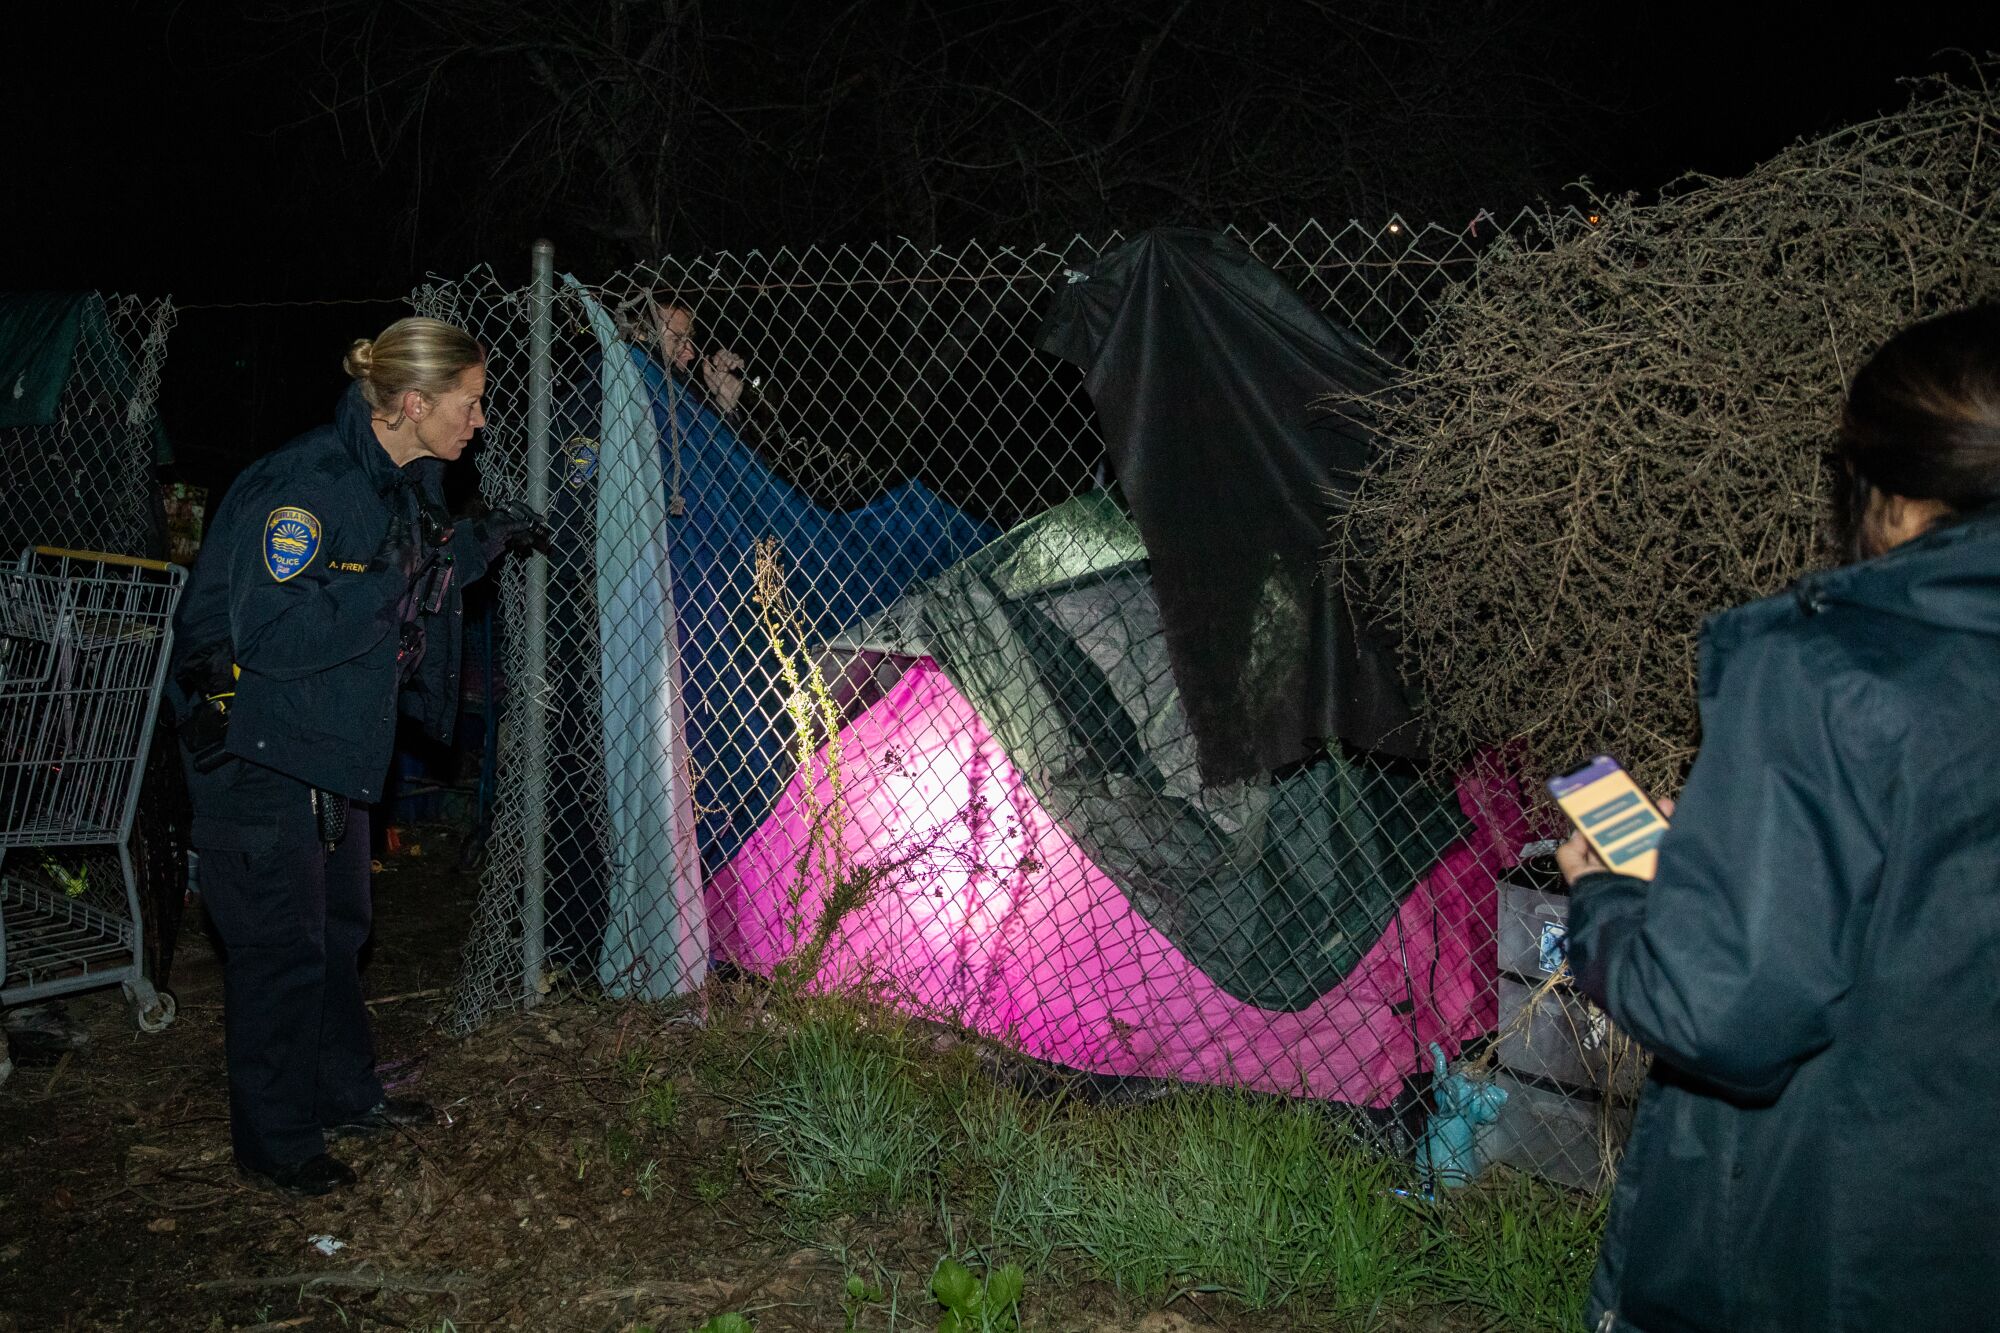 Police officer Alexa Frentzen checks if anyone is sleeping inside a tent while conducting the annual homeless count.